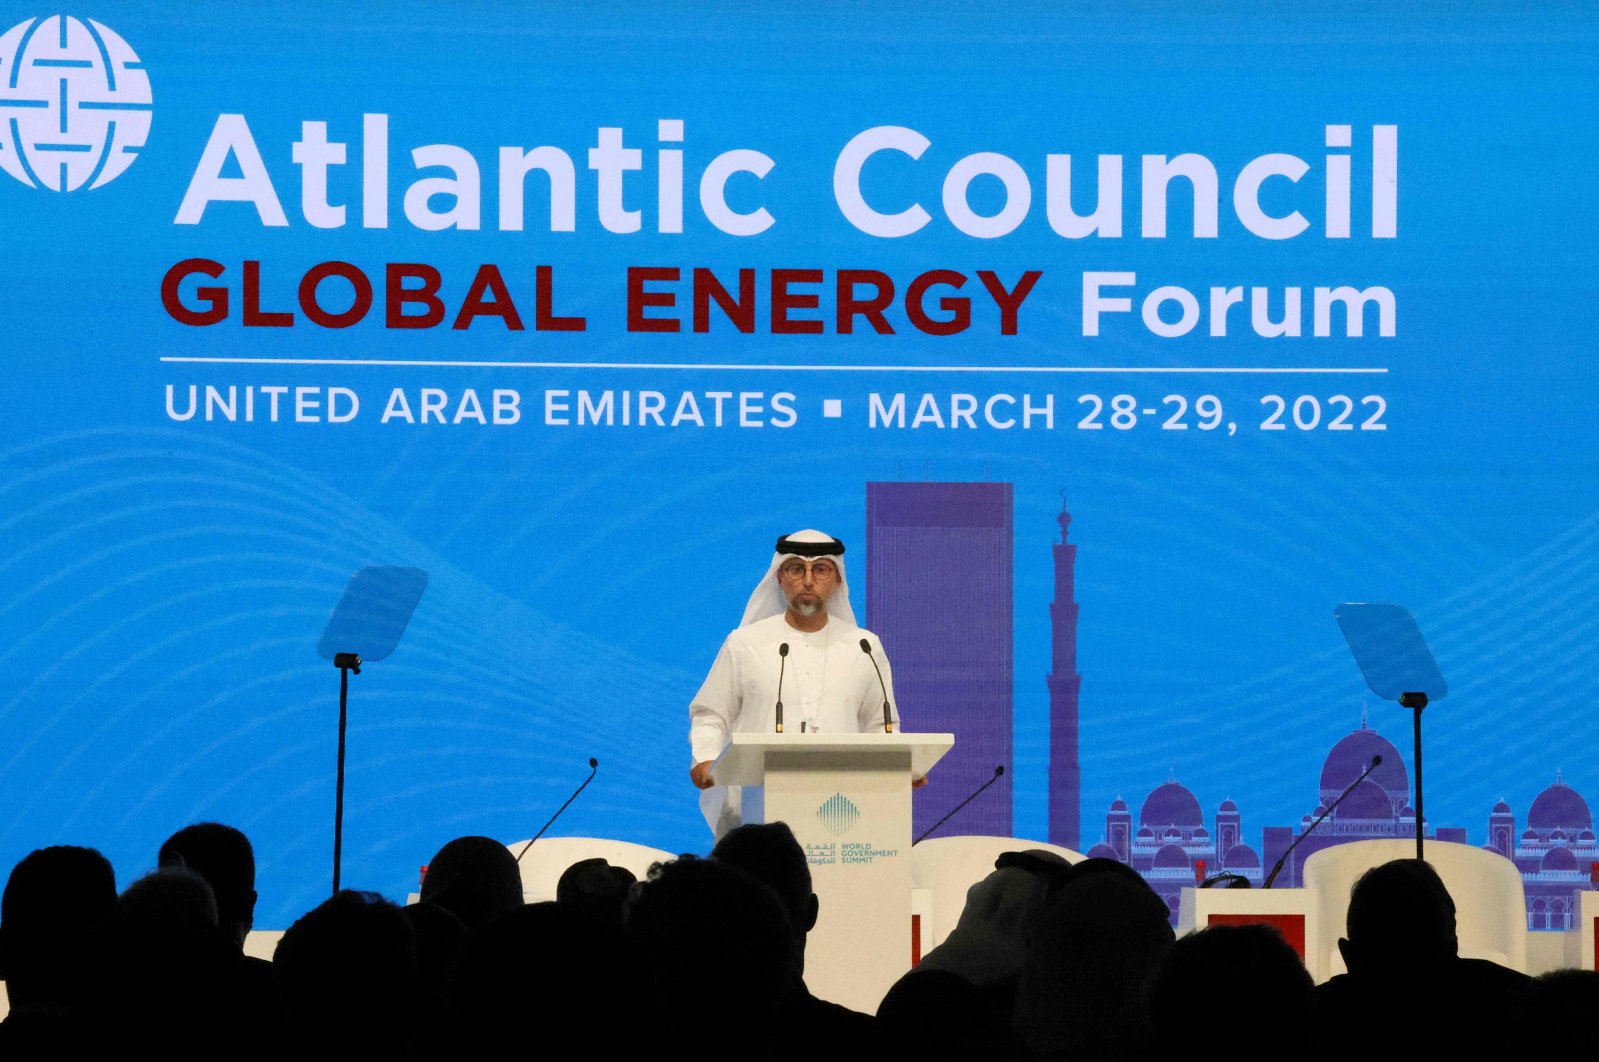 UAE Minister of Energy and Infrastructure Suhail al-Mazrouei speaks during the Atlantic Council&#039;s Global Energy Forum in Dubai, UAE, March 28, 2022. (AFP Photo)